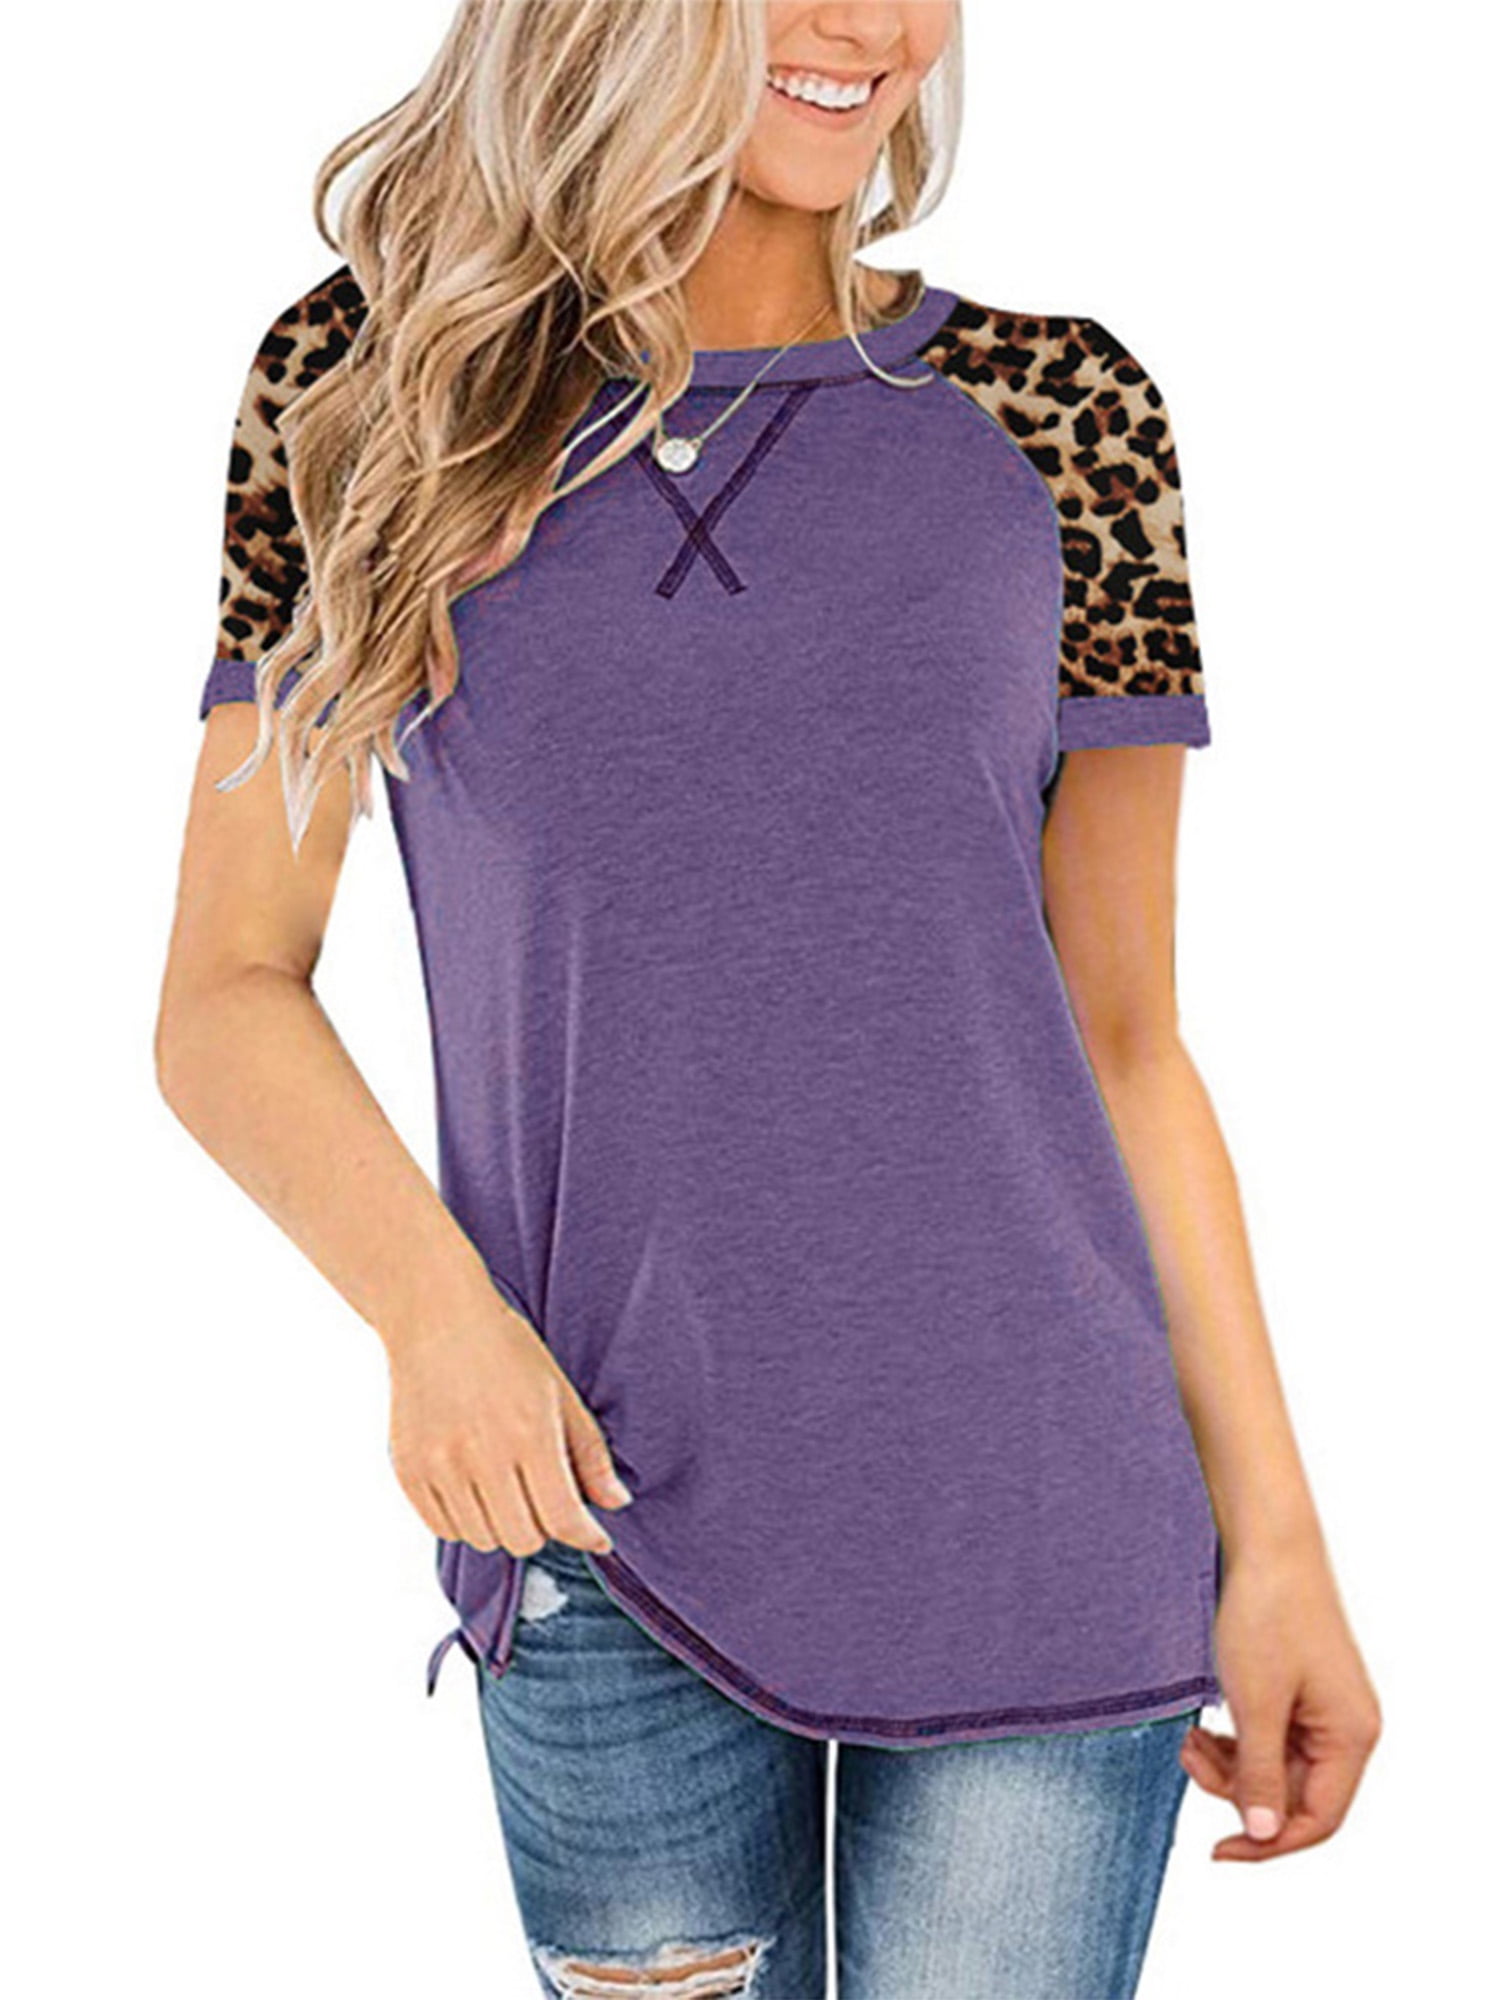 3/4 Sleeve Shirts for Women Crewneck Loose Pullover Leopard Print Tops Comfy Soft Summer Blouses Casual Print Tops